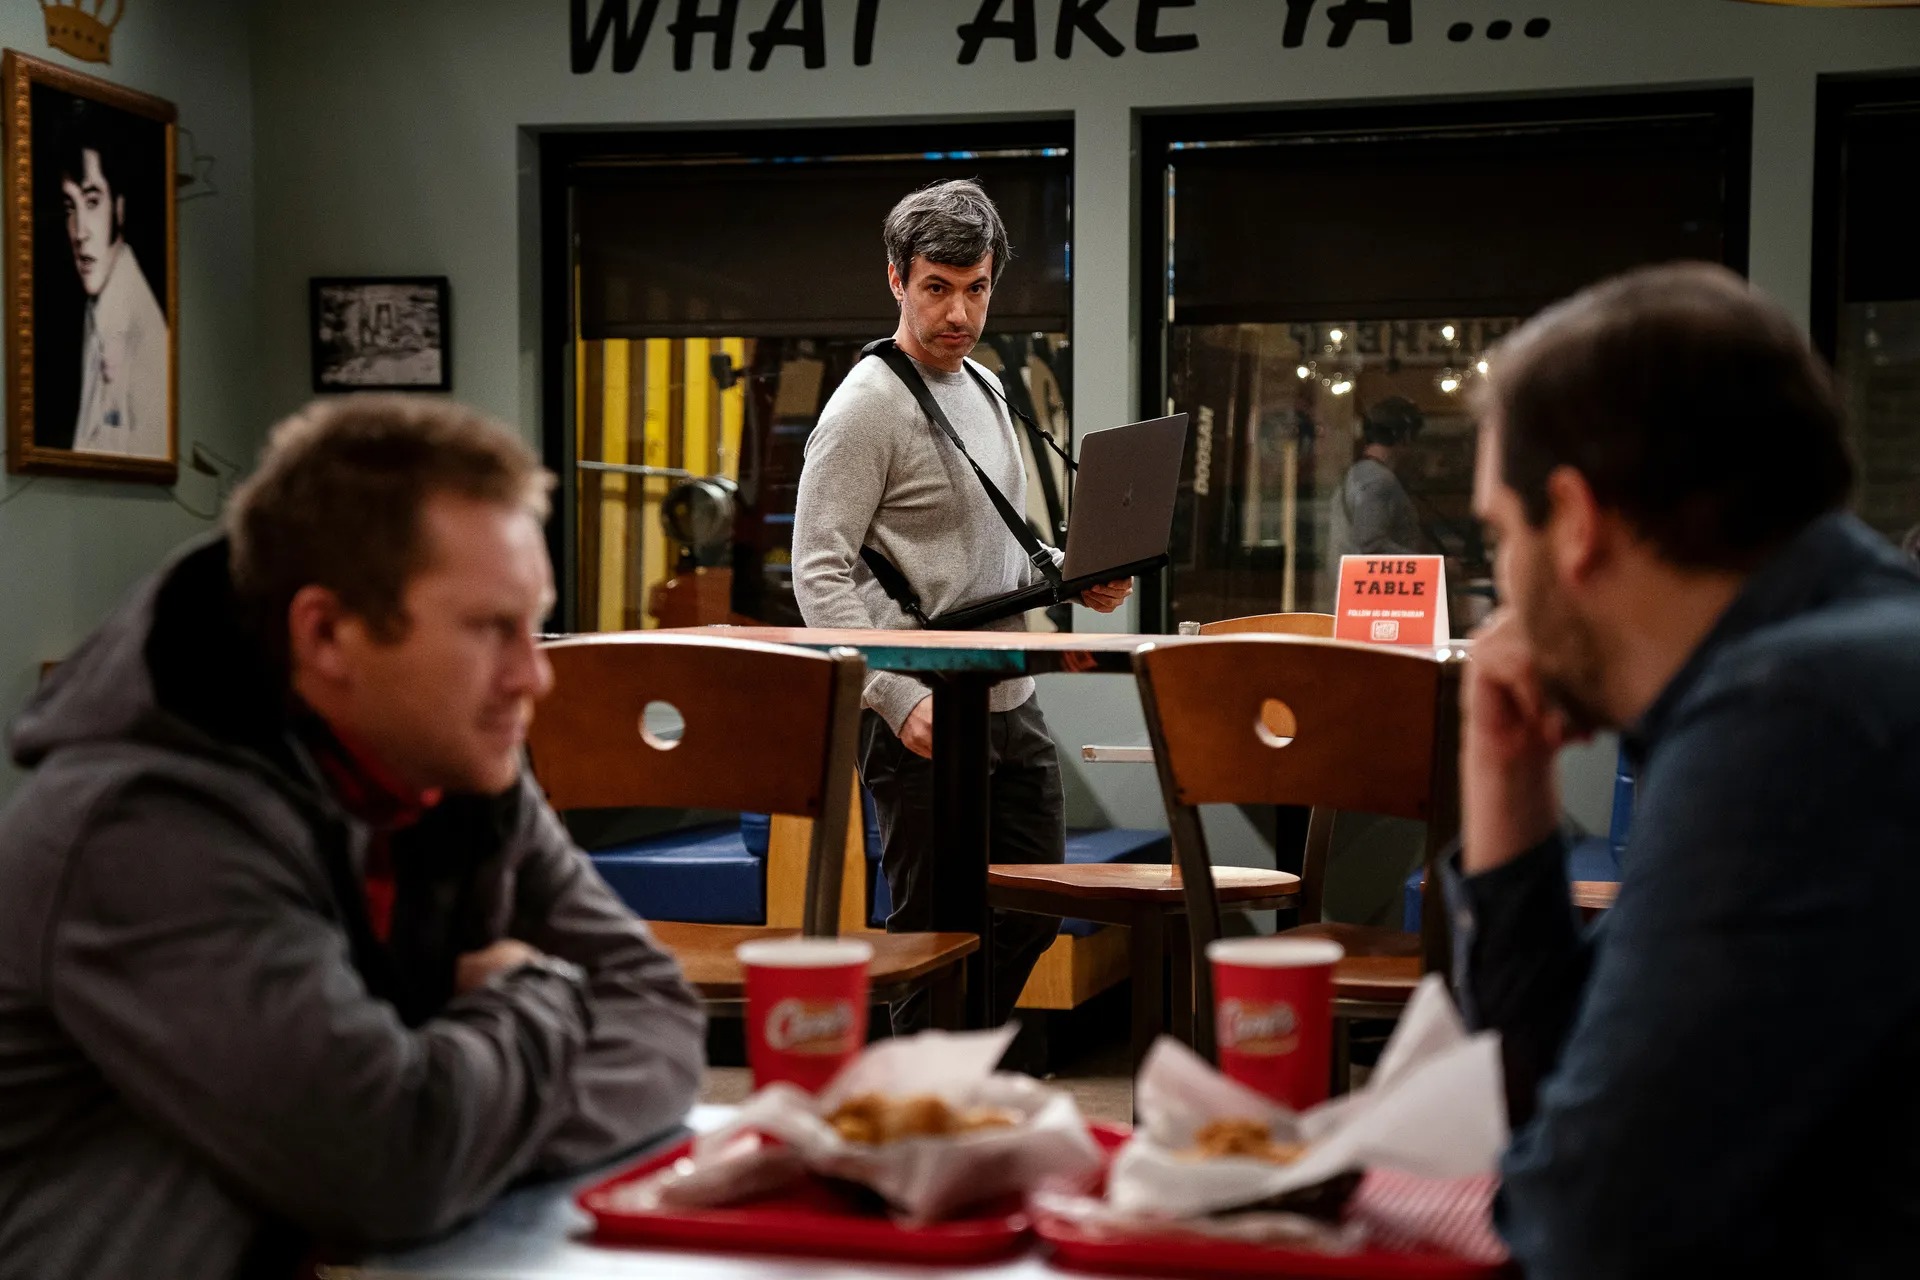 In a shot from The Rehearsal, Nathan Fielder, a laptop strapped to his chest, observes two men having a conversation across a table at a diner.